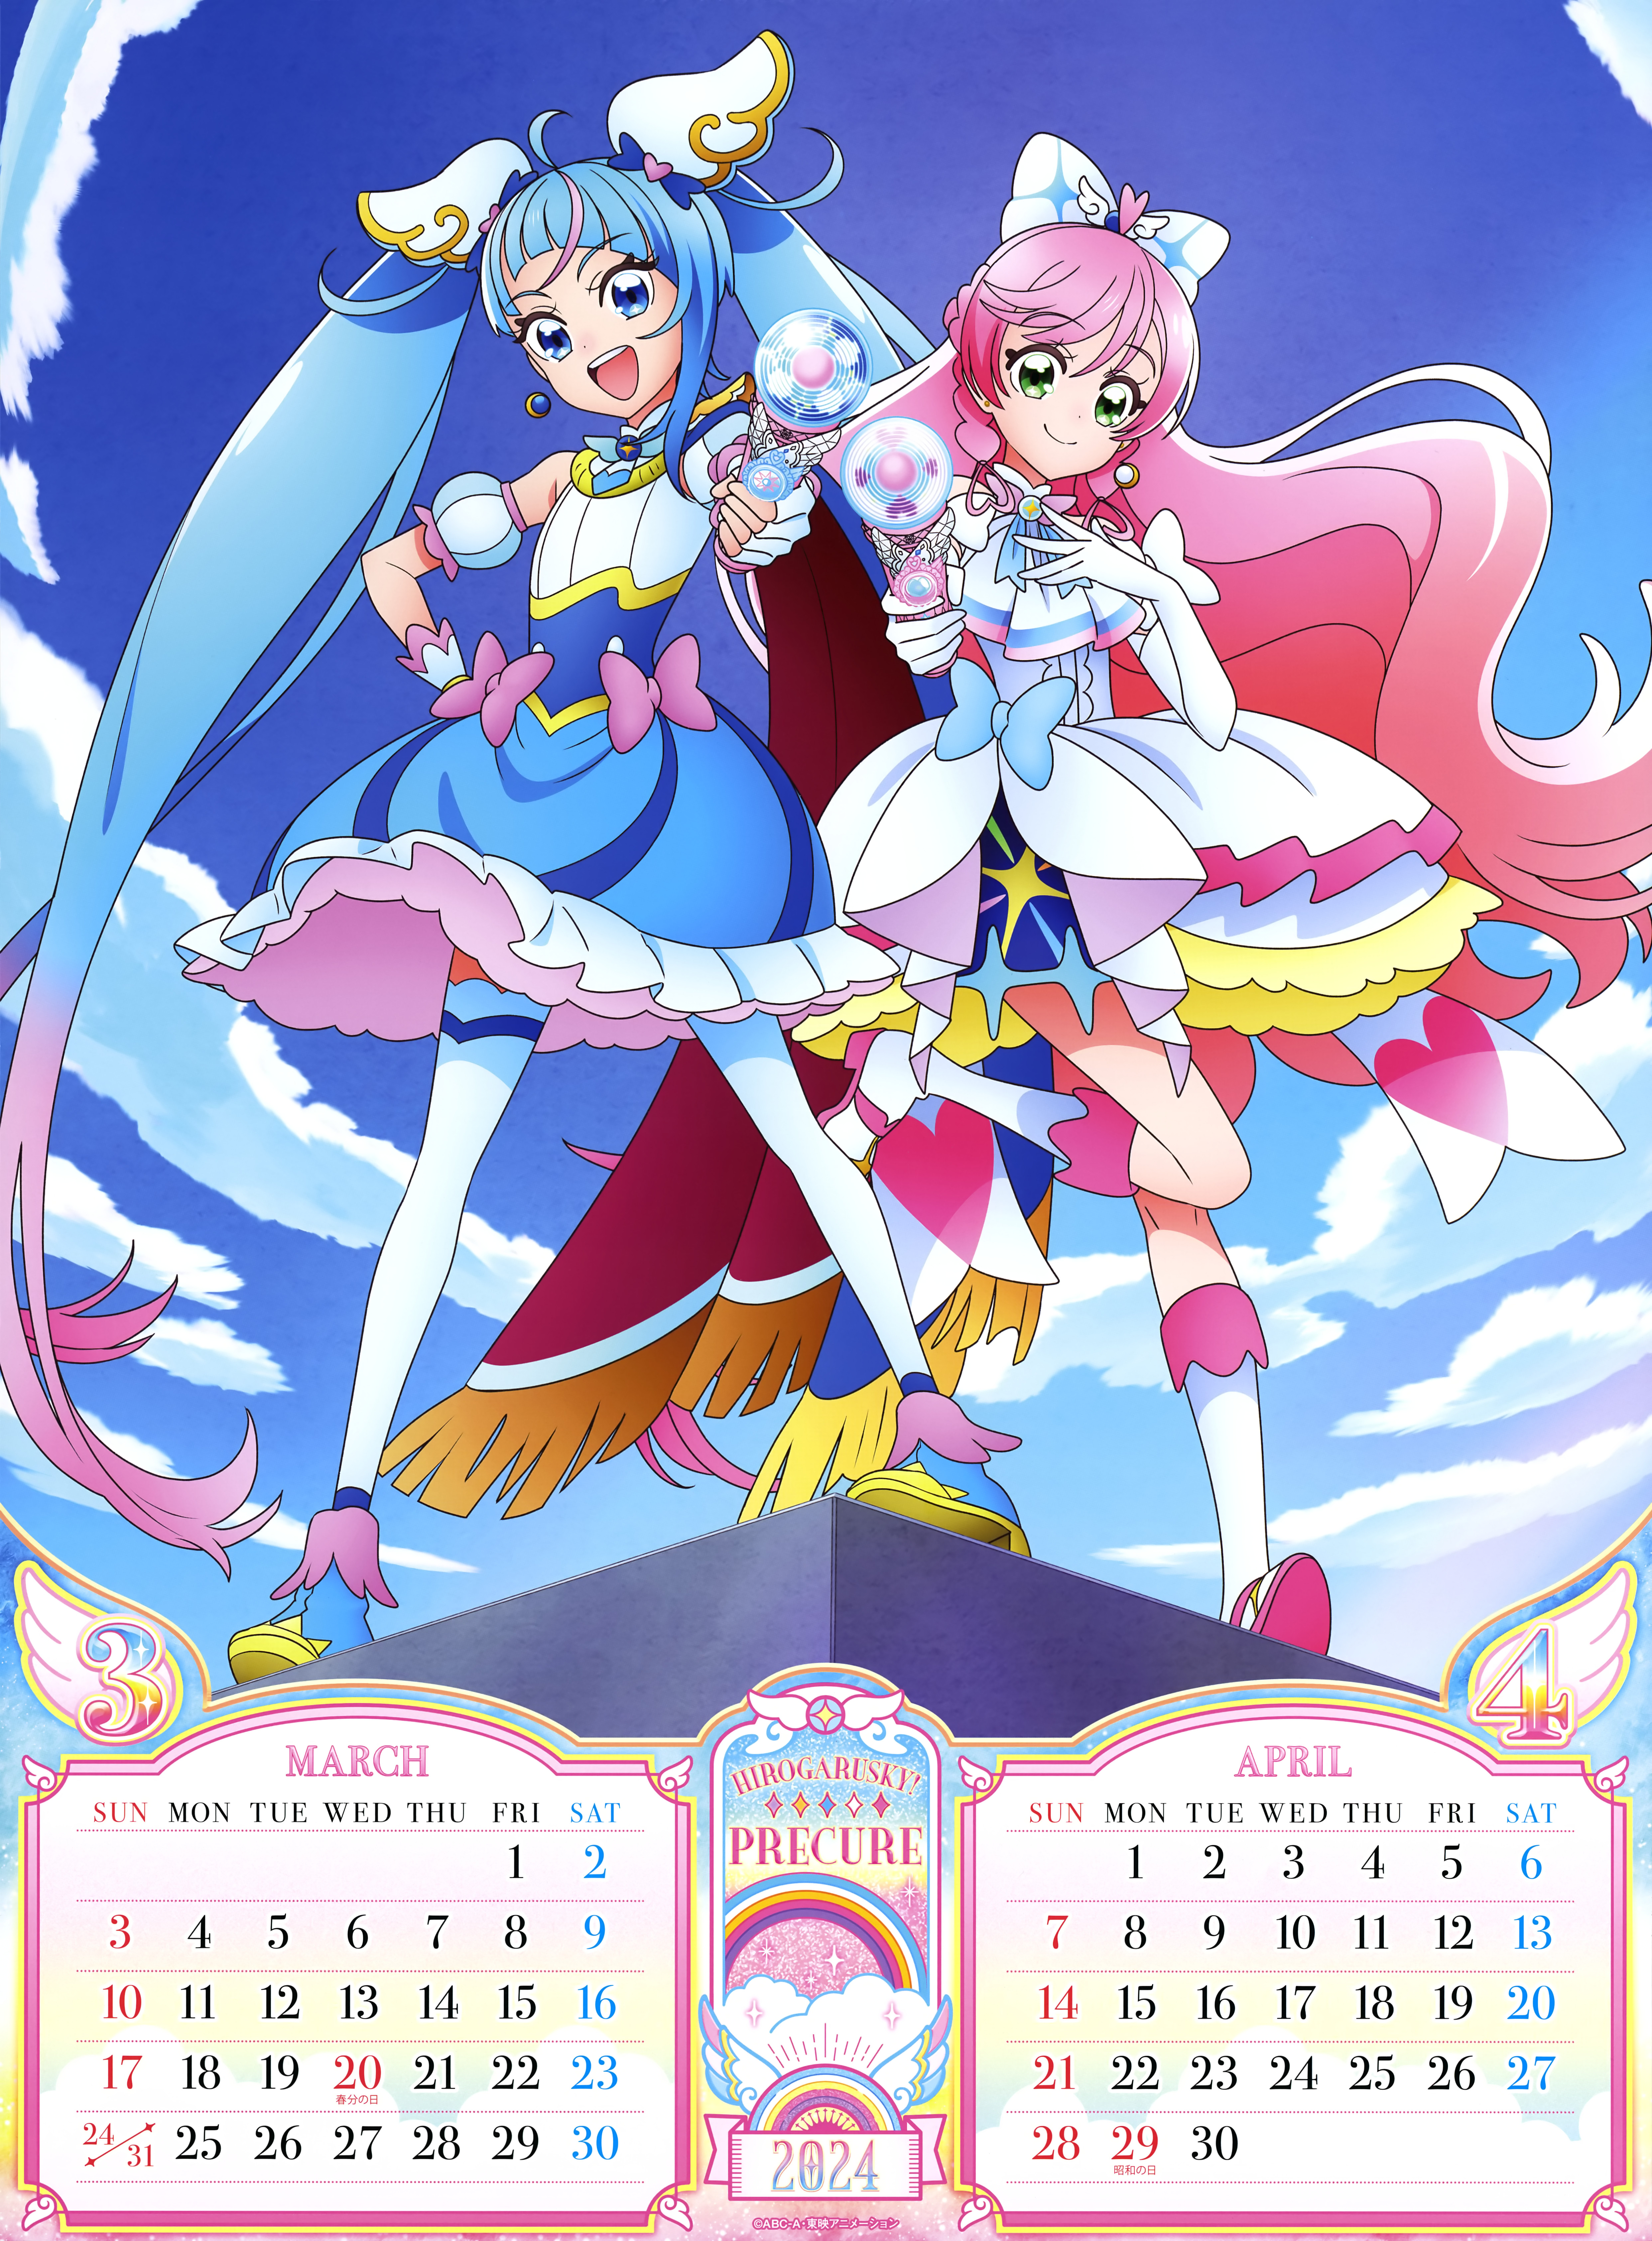 New Precure anime film confirmed to release in 2024